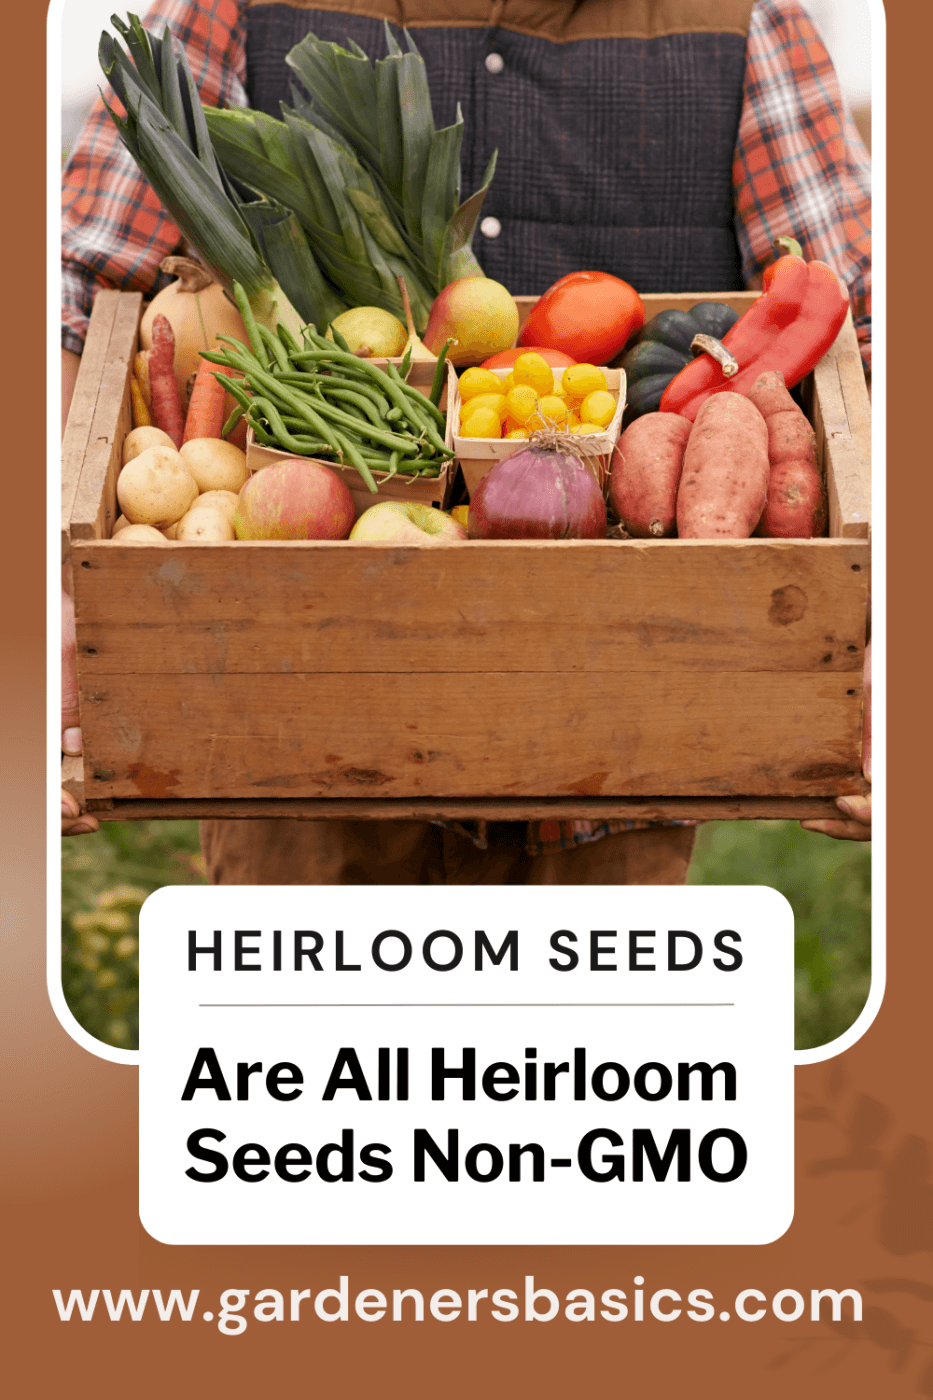 Are All Heirloom Seeds Non-GMO